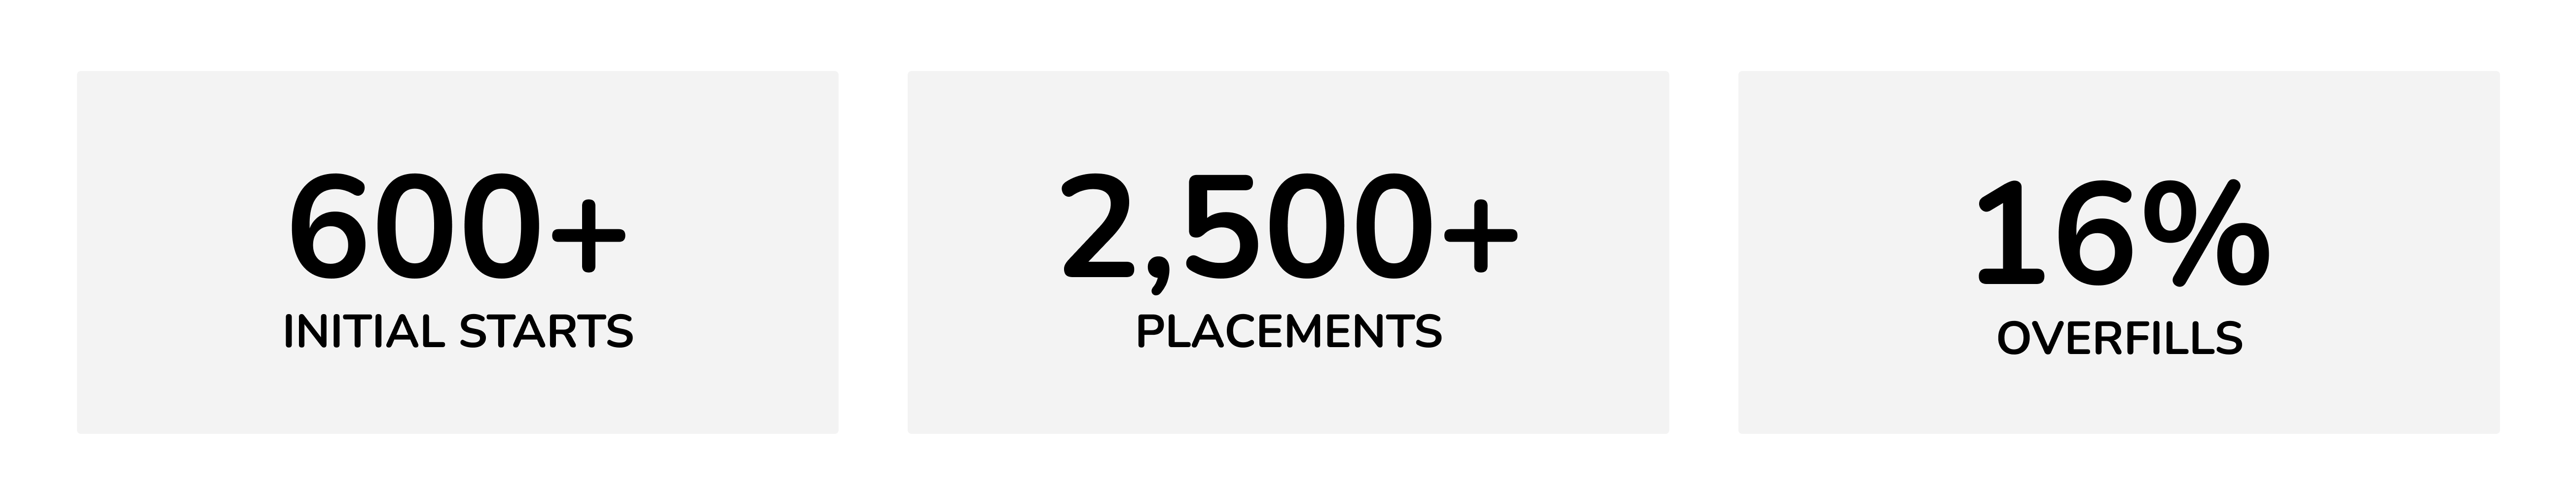 600+ Initial starts; 2,500+ Placements; 16% Overfills